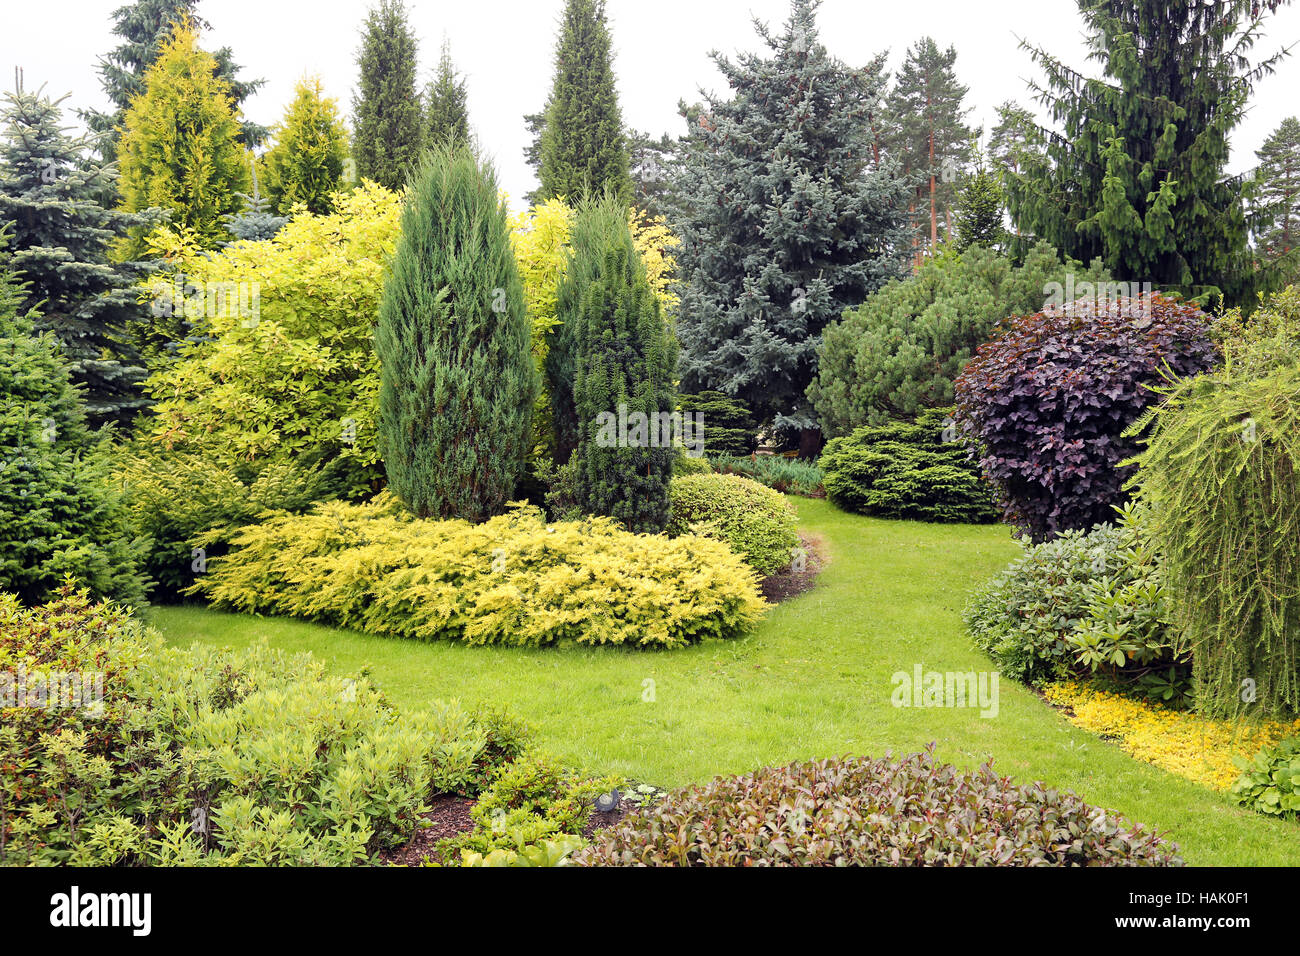 beautiful garden landscape with variety of conifers and other plants Stock Photo